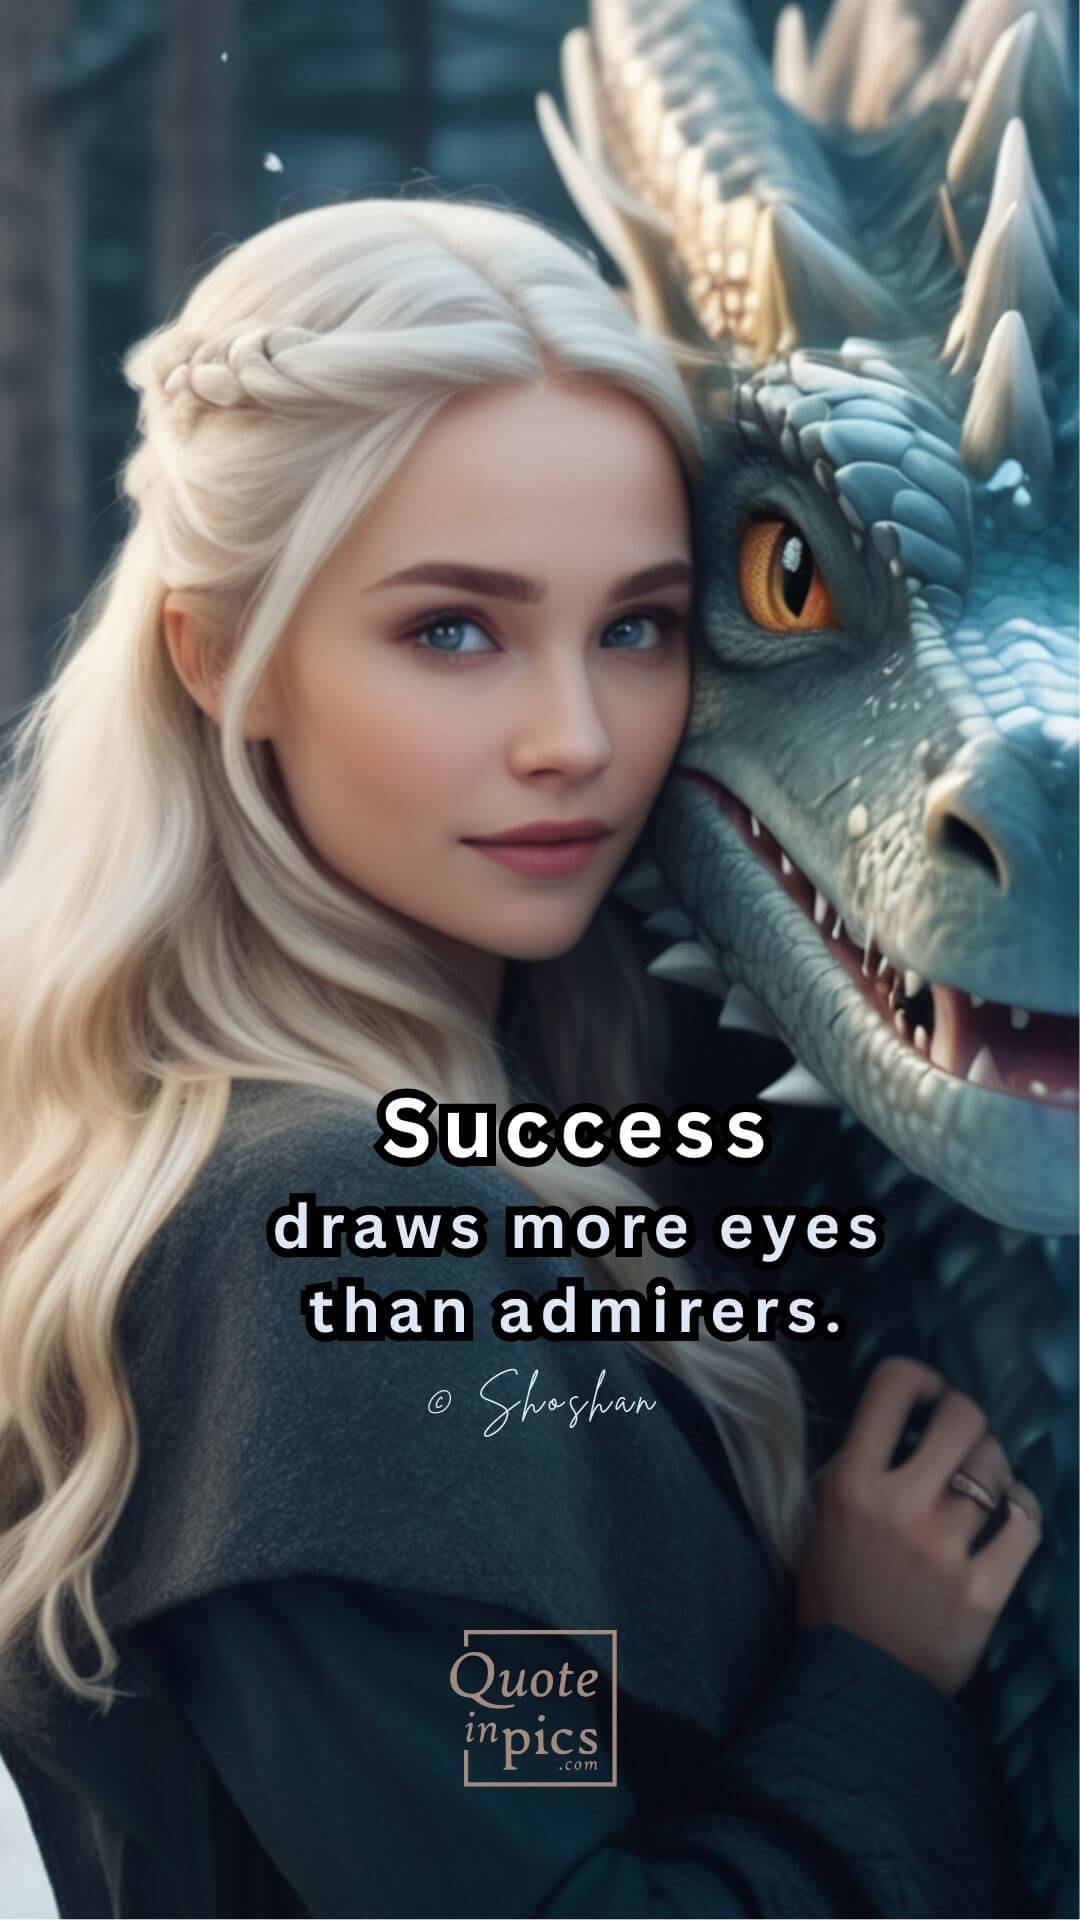 Success draws more eyes than admirers.